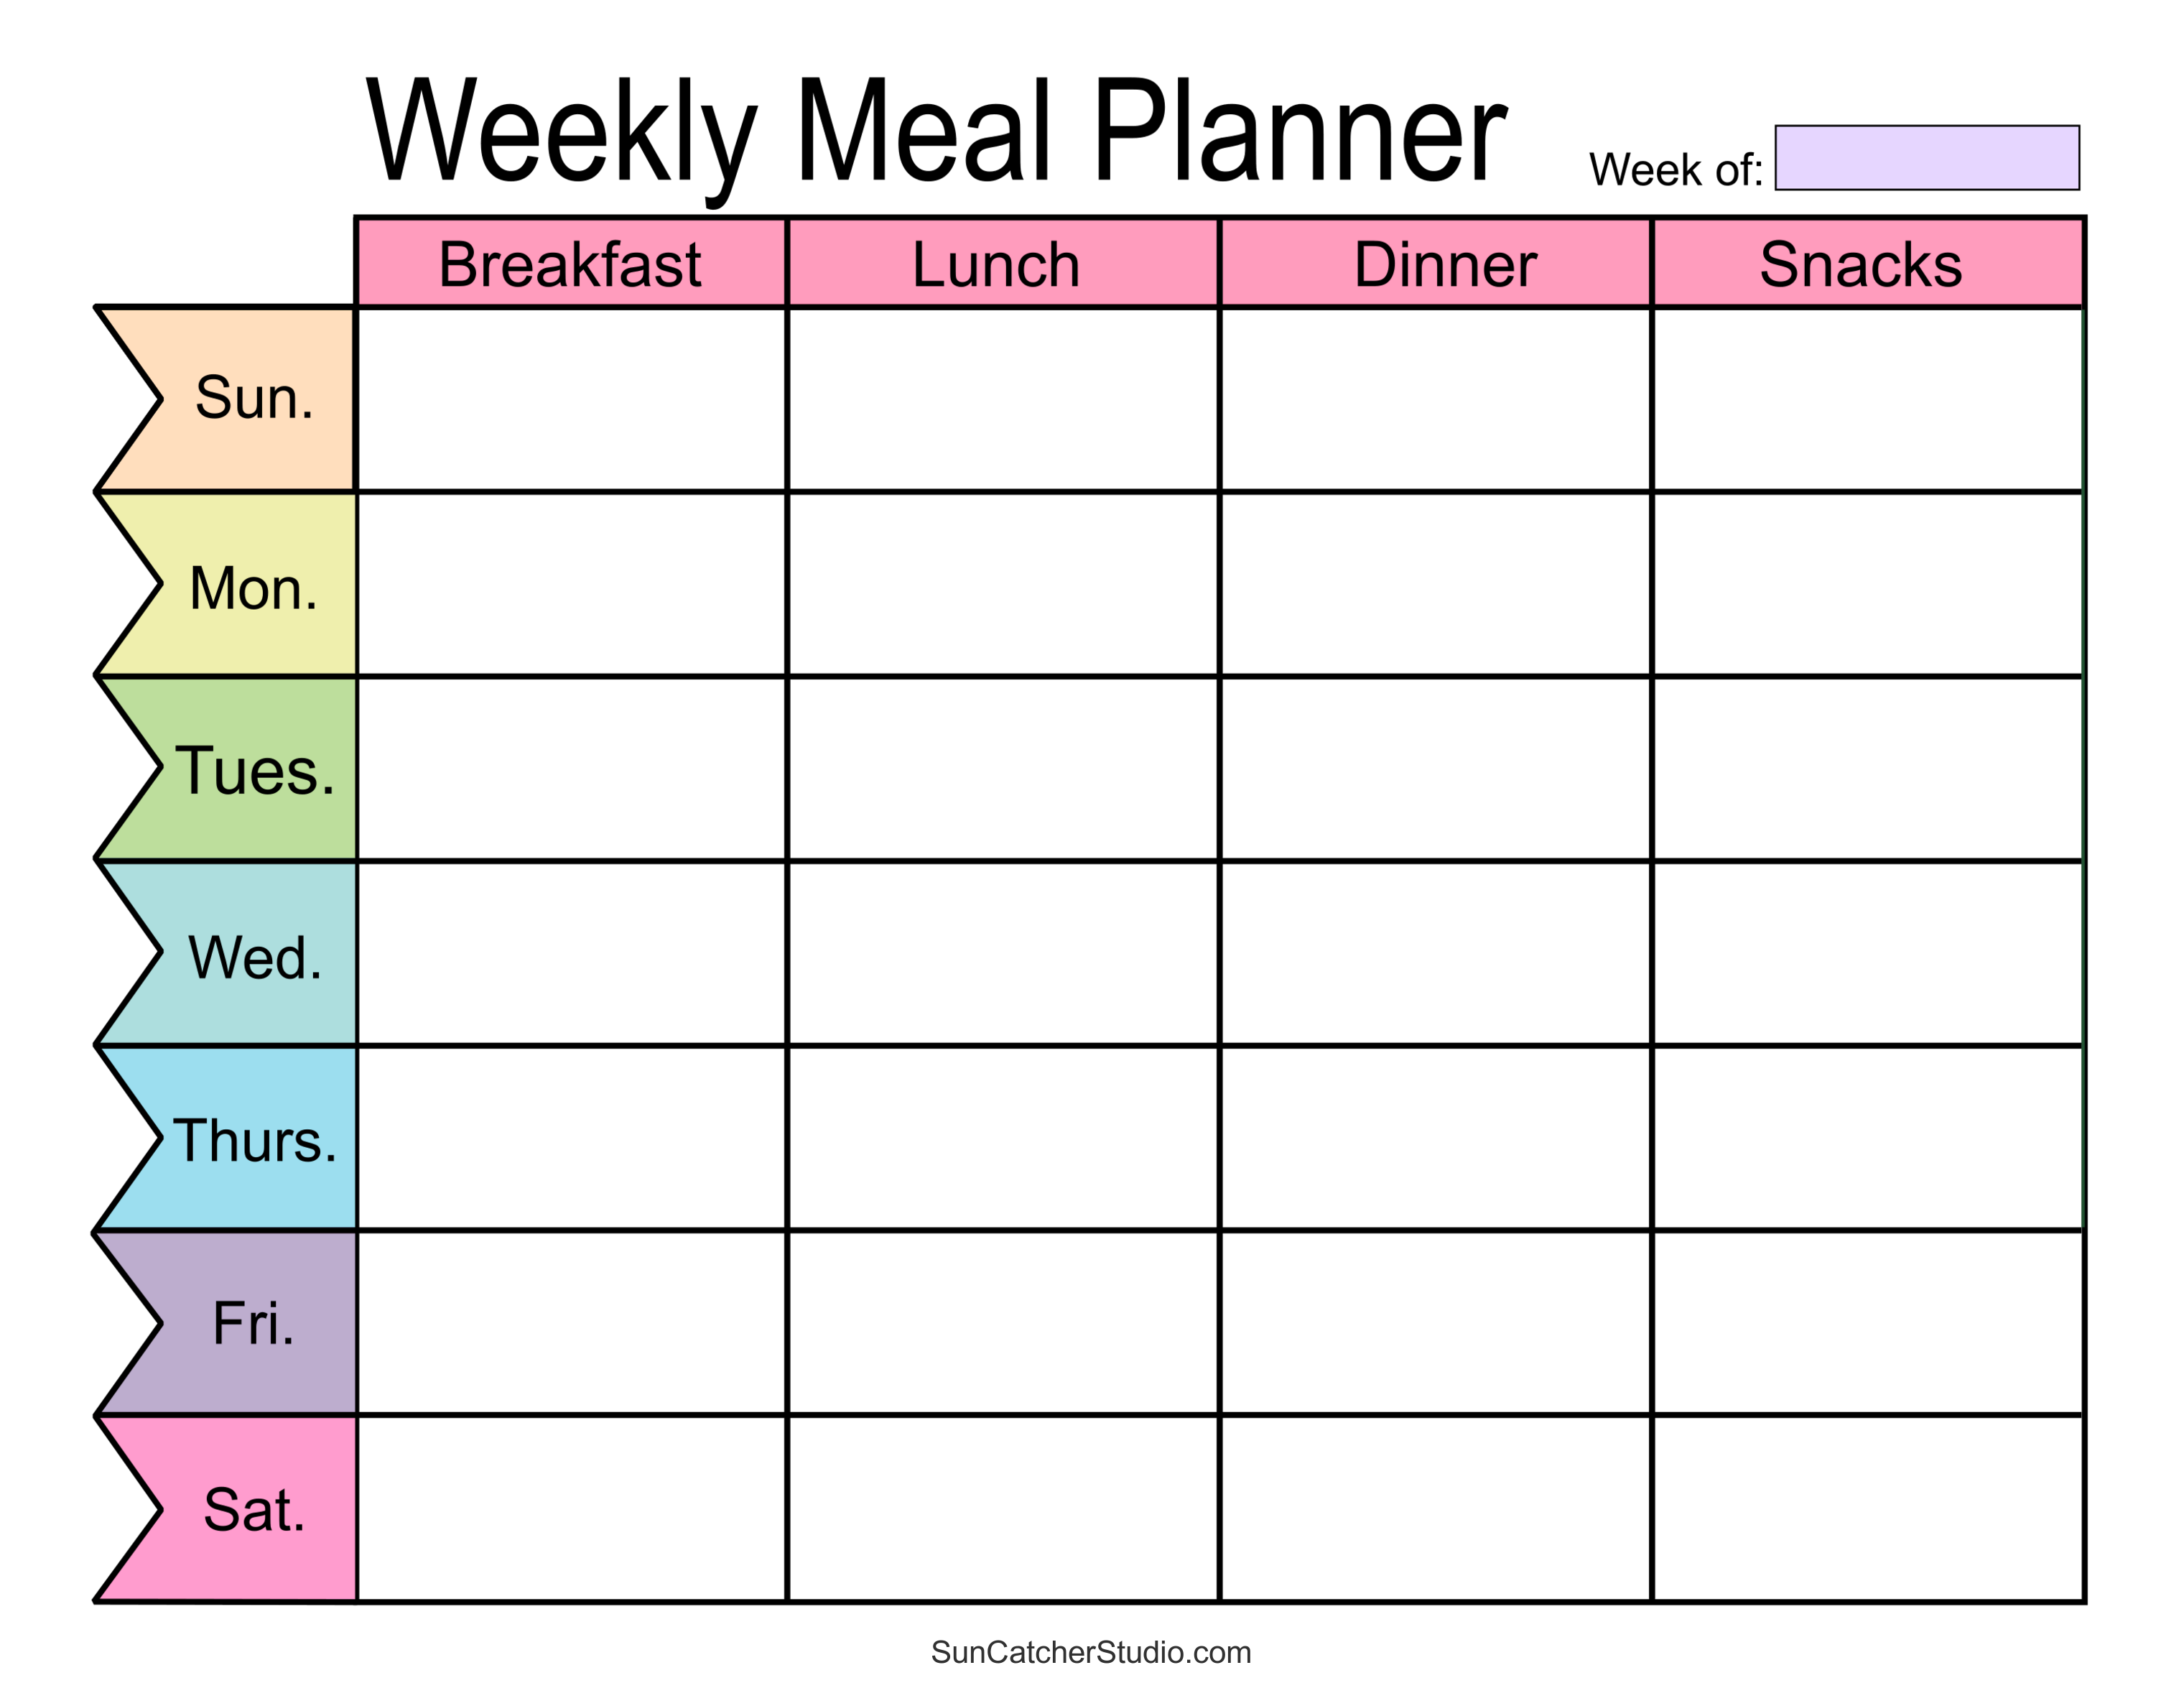 Meal Planners: Printable Weekly Menu Templates (PDF) – DIY Projects,  Patterns, Monograms, Designs, Templates